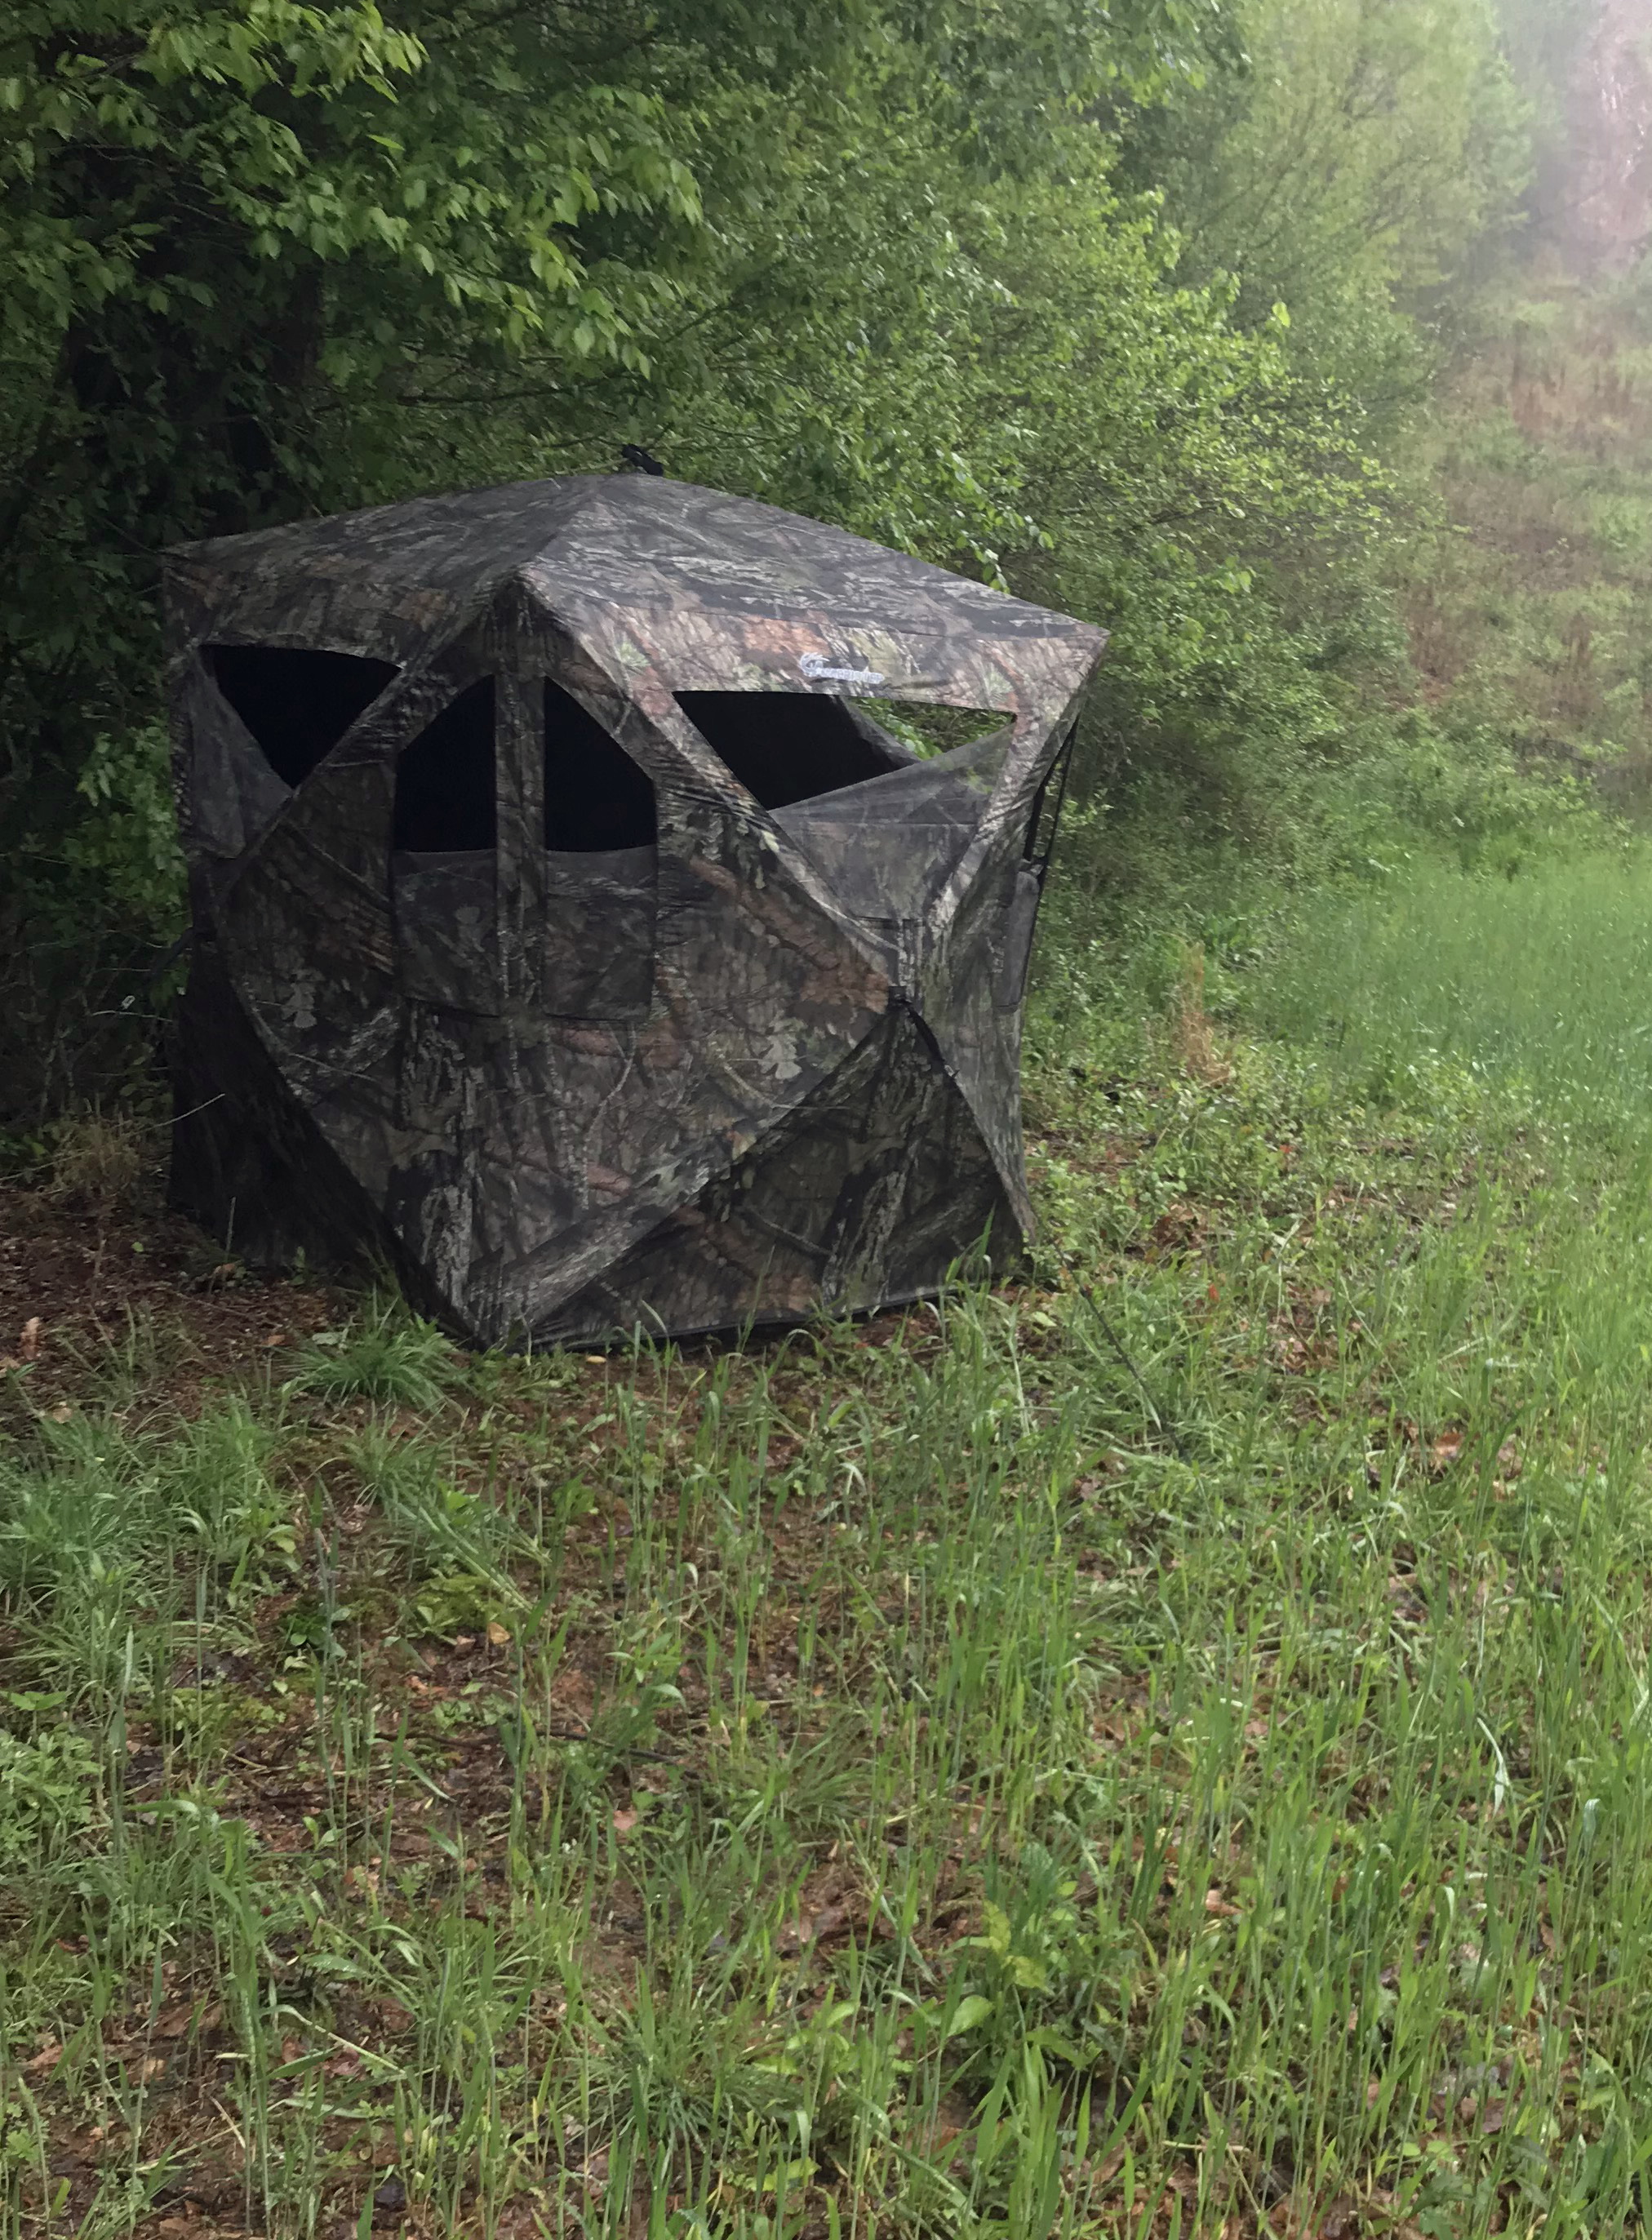 Justin Martin points out some cool hunting gift ideas like a pop-up blind.